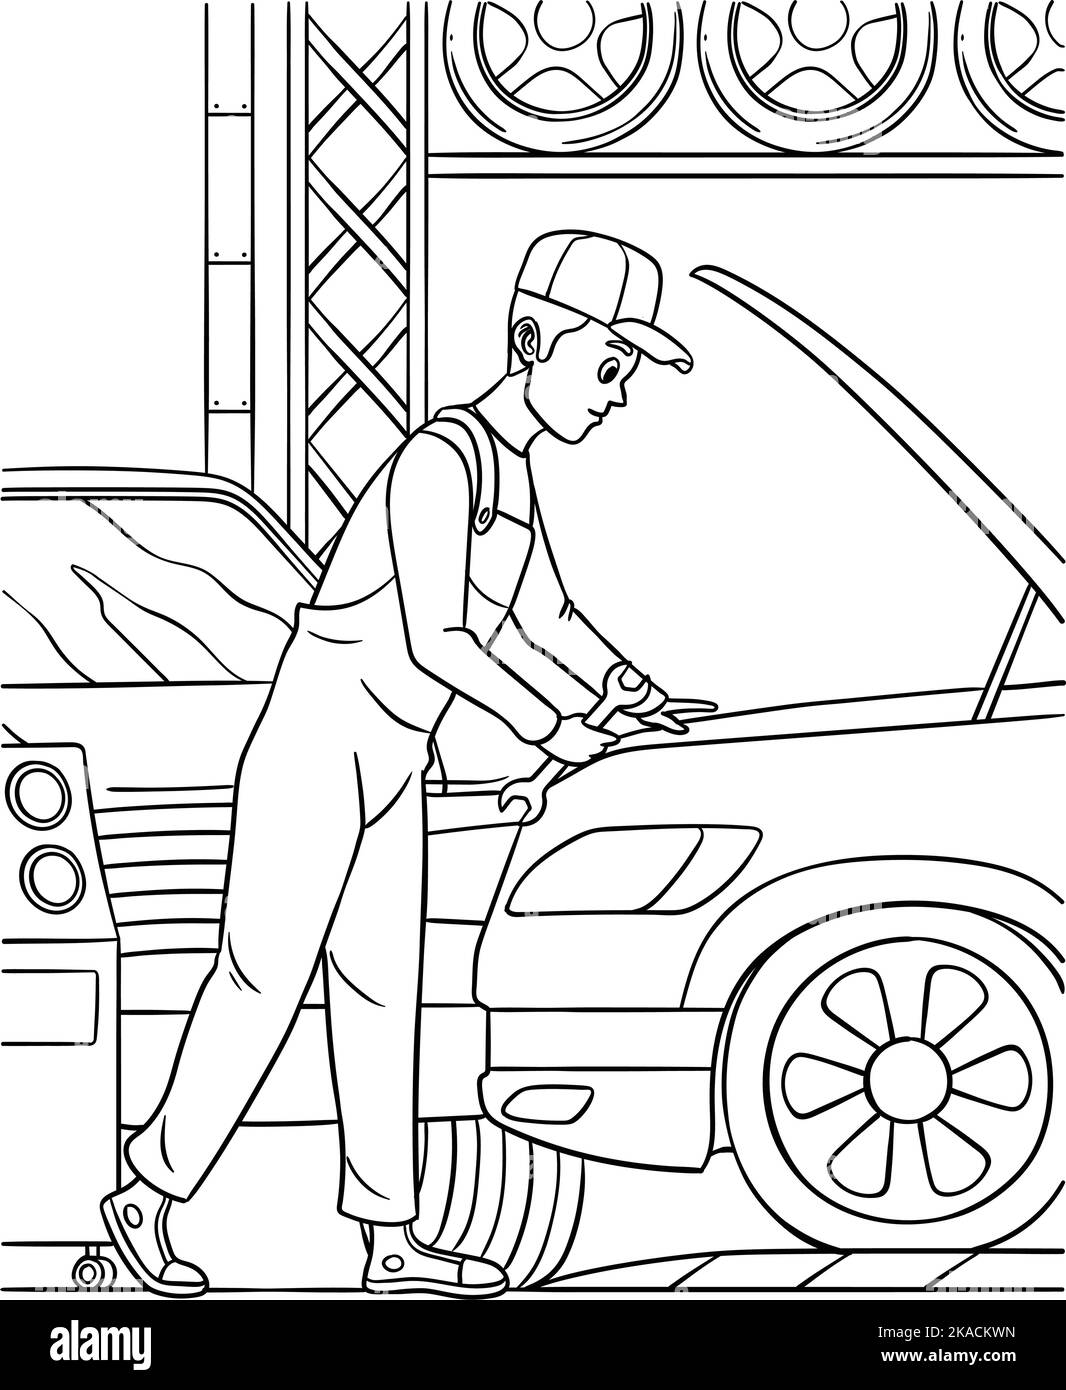 Auto Mechanic Coloring Page for Kids Stock Vector